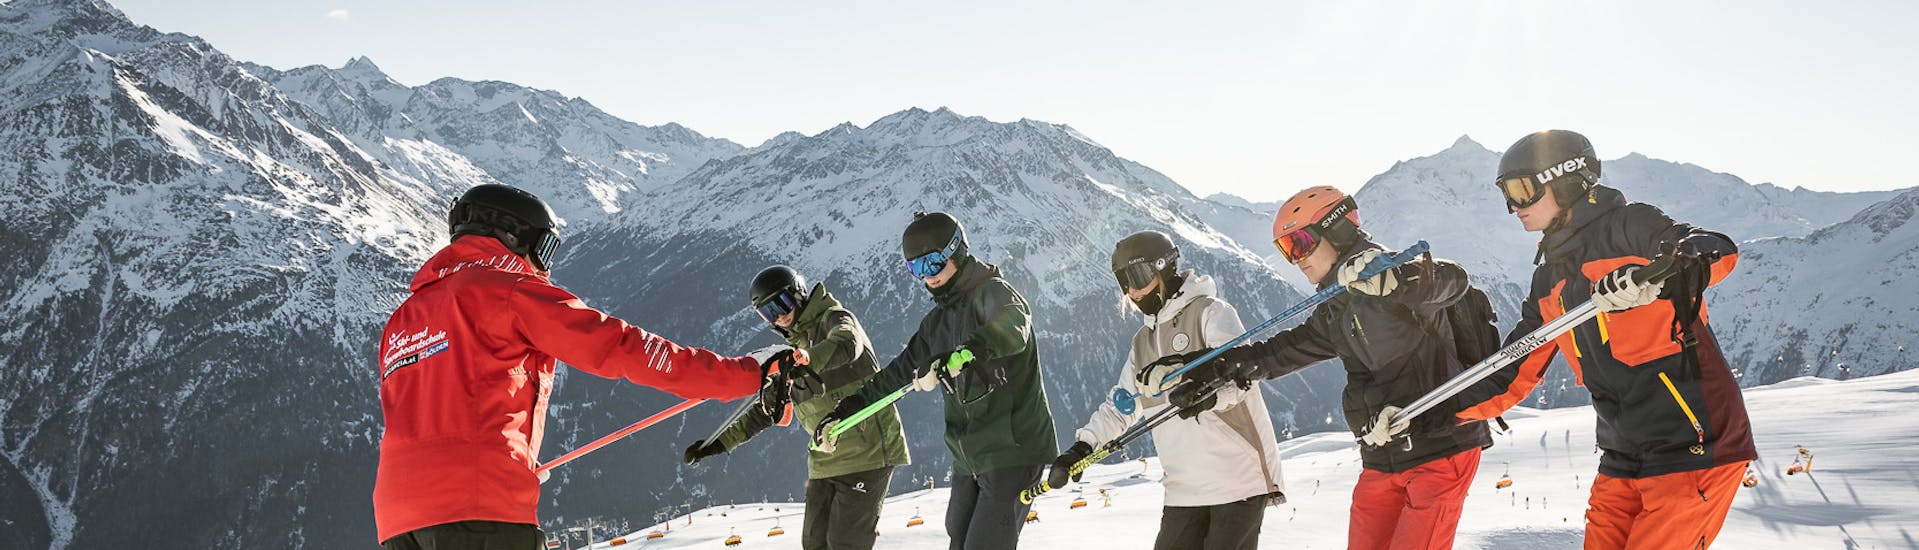 Adult Ski Lessons (from 16 y.) for Beginners.